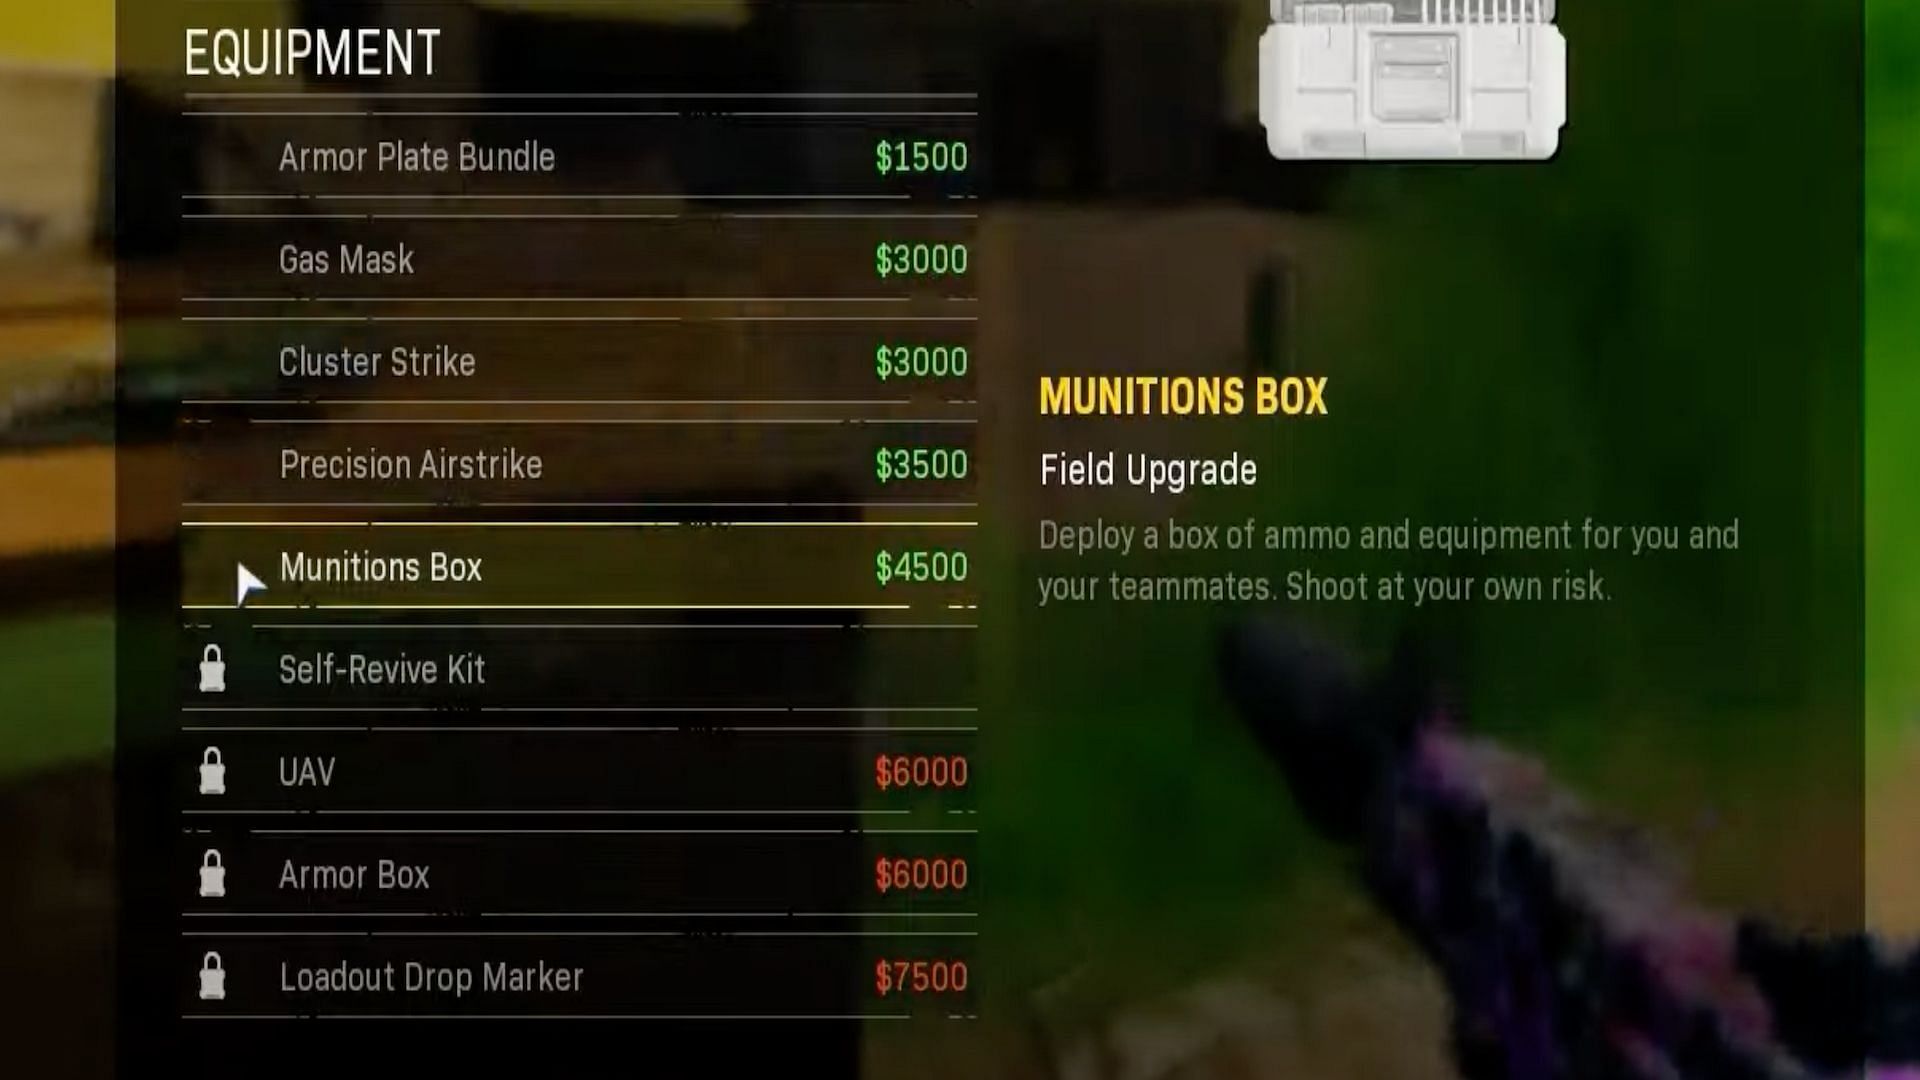 Users of COD Warzone can do many of the same things a regular Buy Station can do with the Deployable Buy Station, including redeploying teammates, loadouts, and more (Image via Sozco/YouTube)